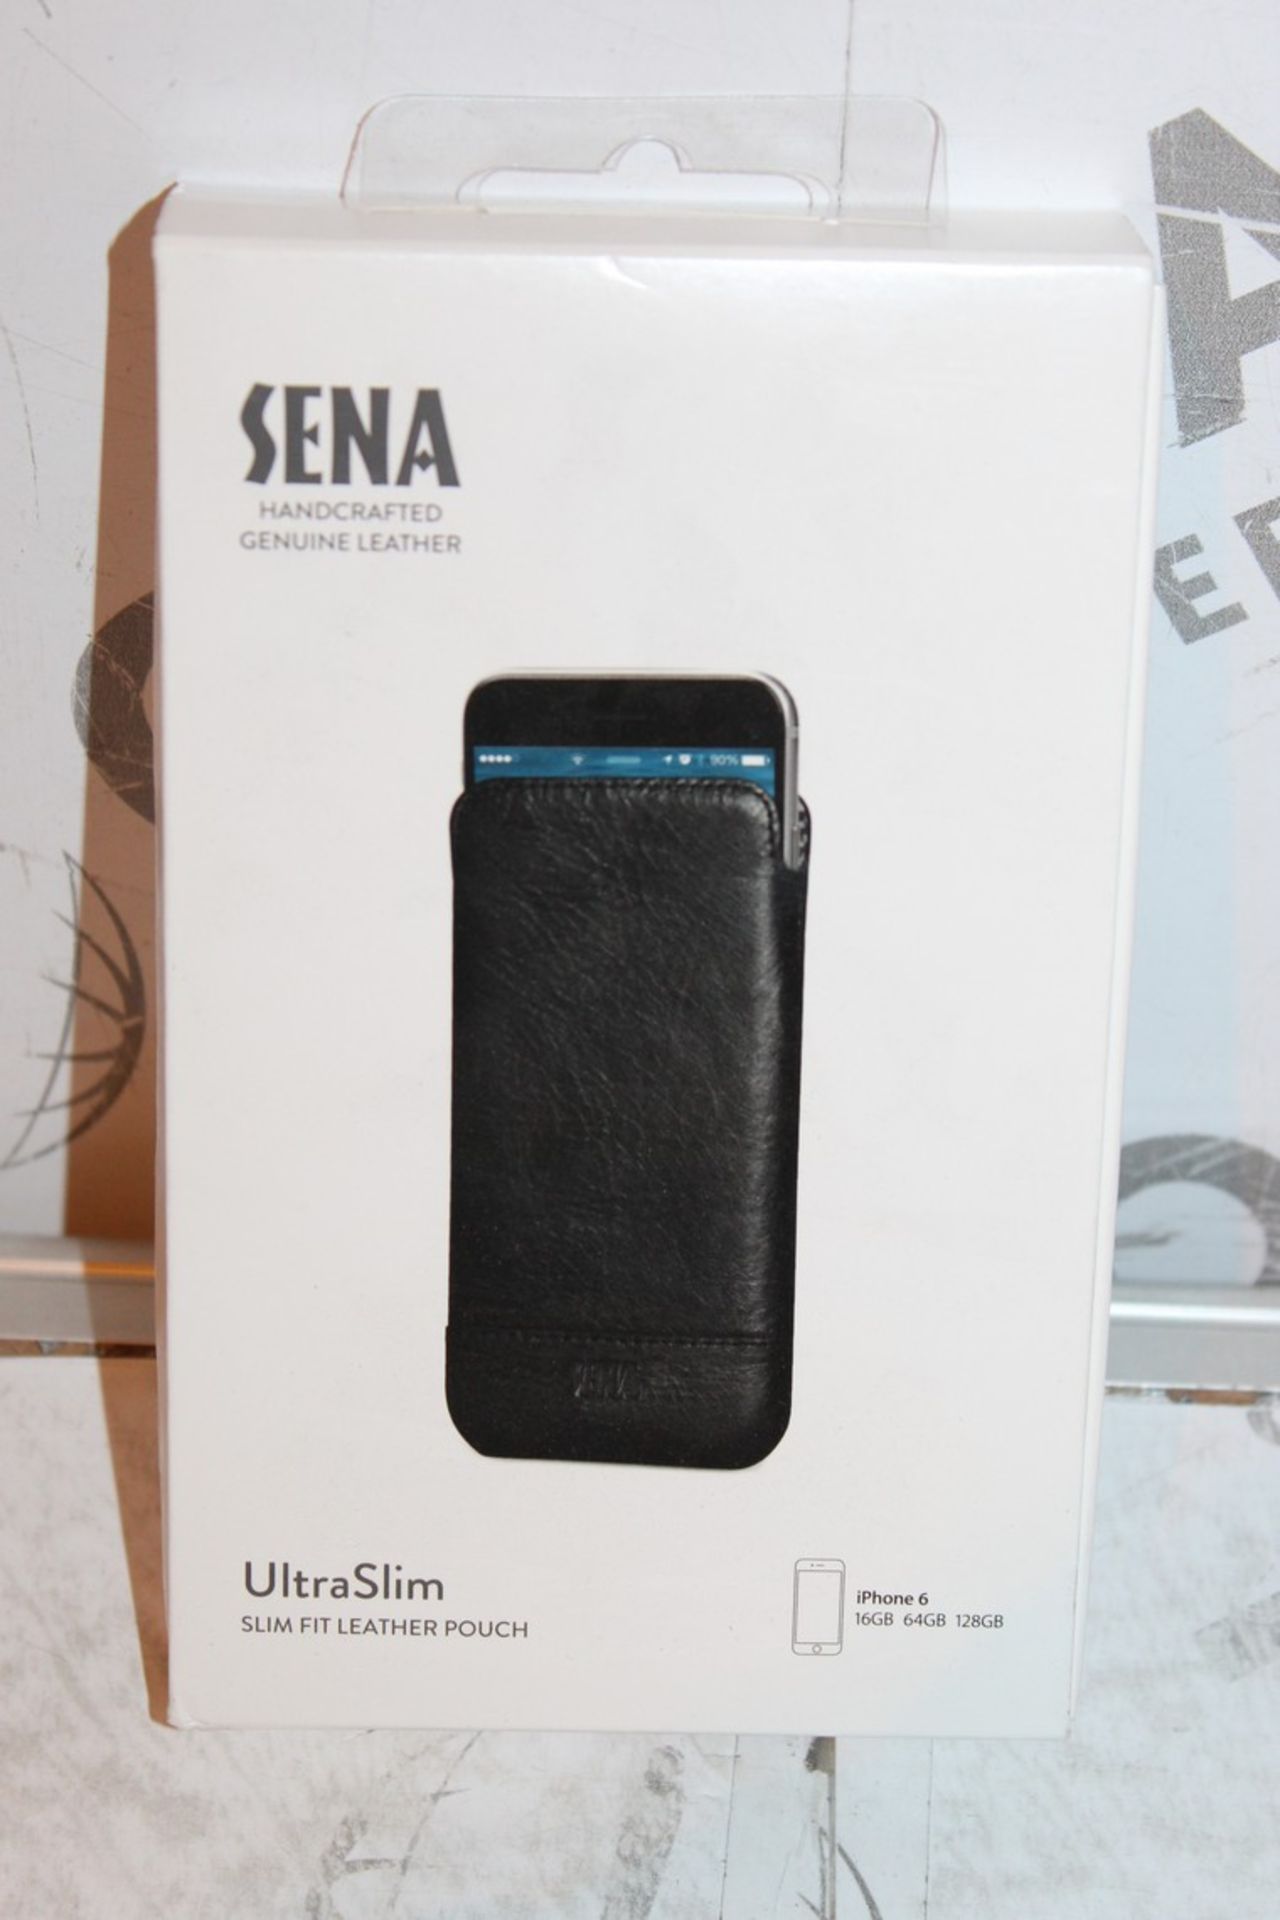 5 Boxed Sena Ultra Slim Iphone 6+ Leather Phone Pouches, Combined RRP£100.00